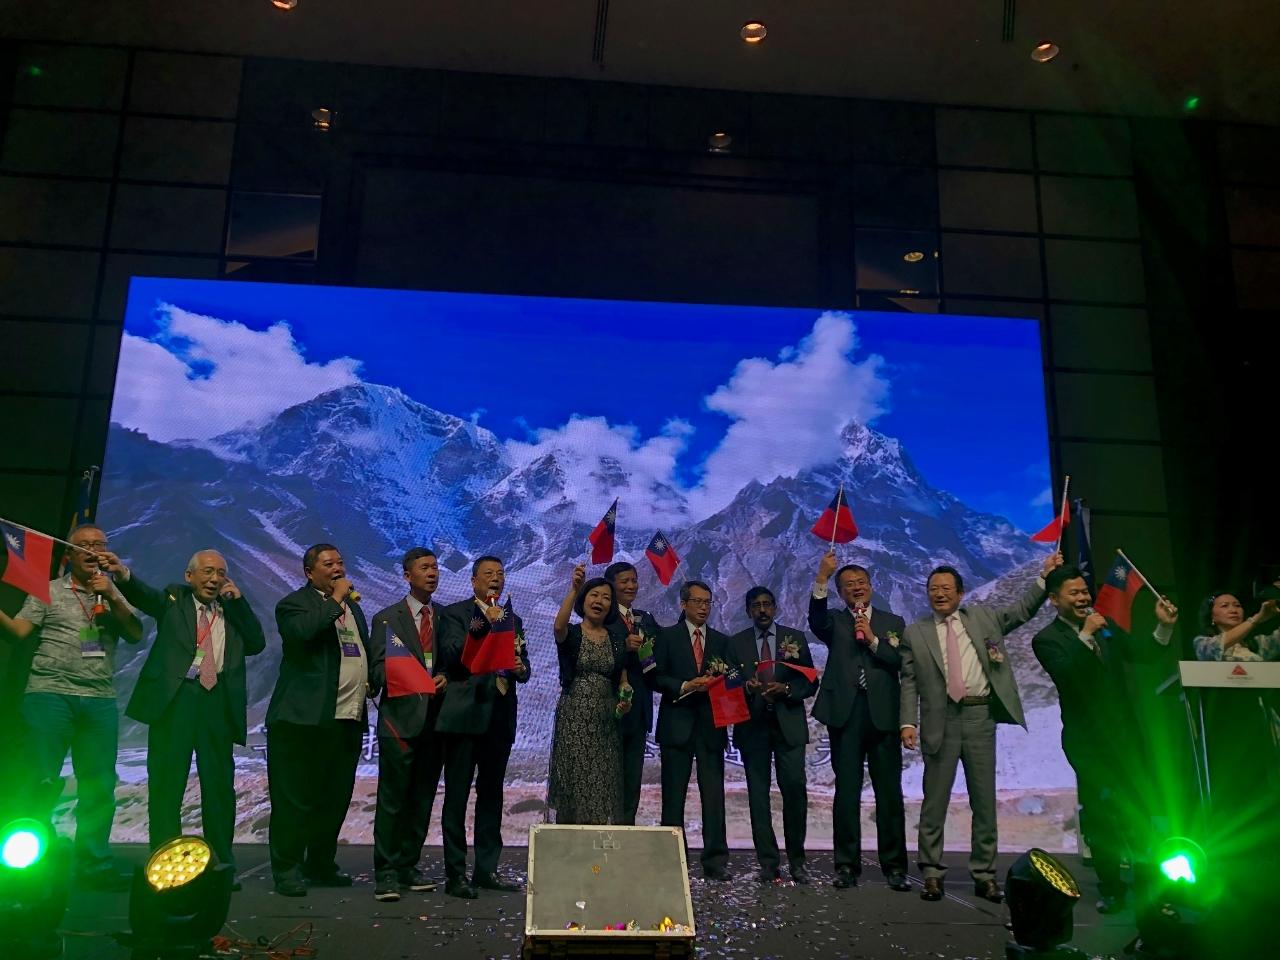 Representative Anne Hung (sixth from left) and the distinguished guests wave the flags of the Republic of China and sing “Ode to the Republic of China" together.